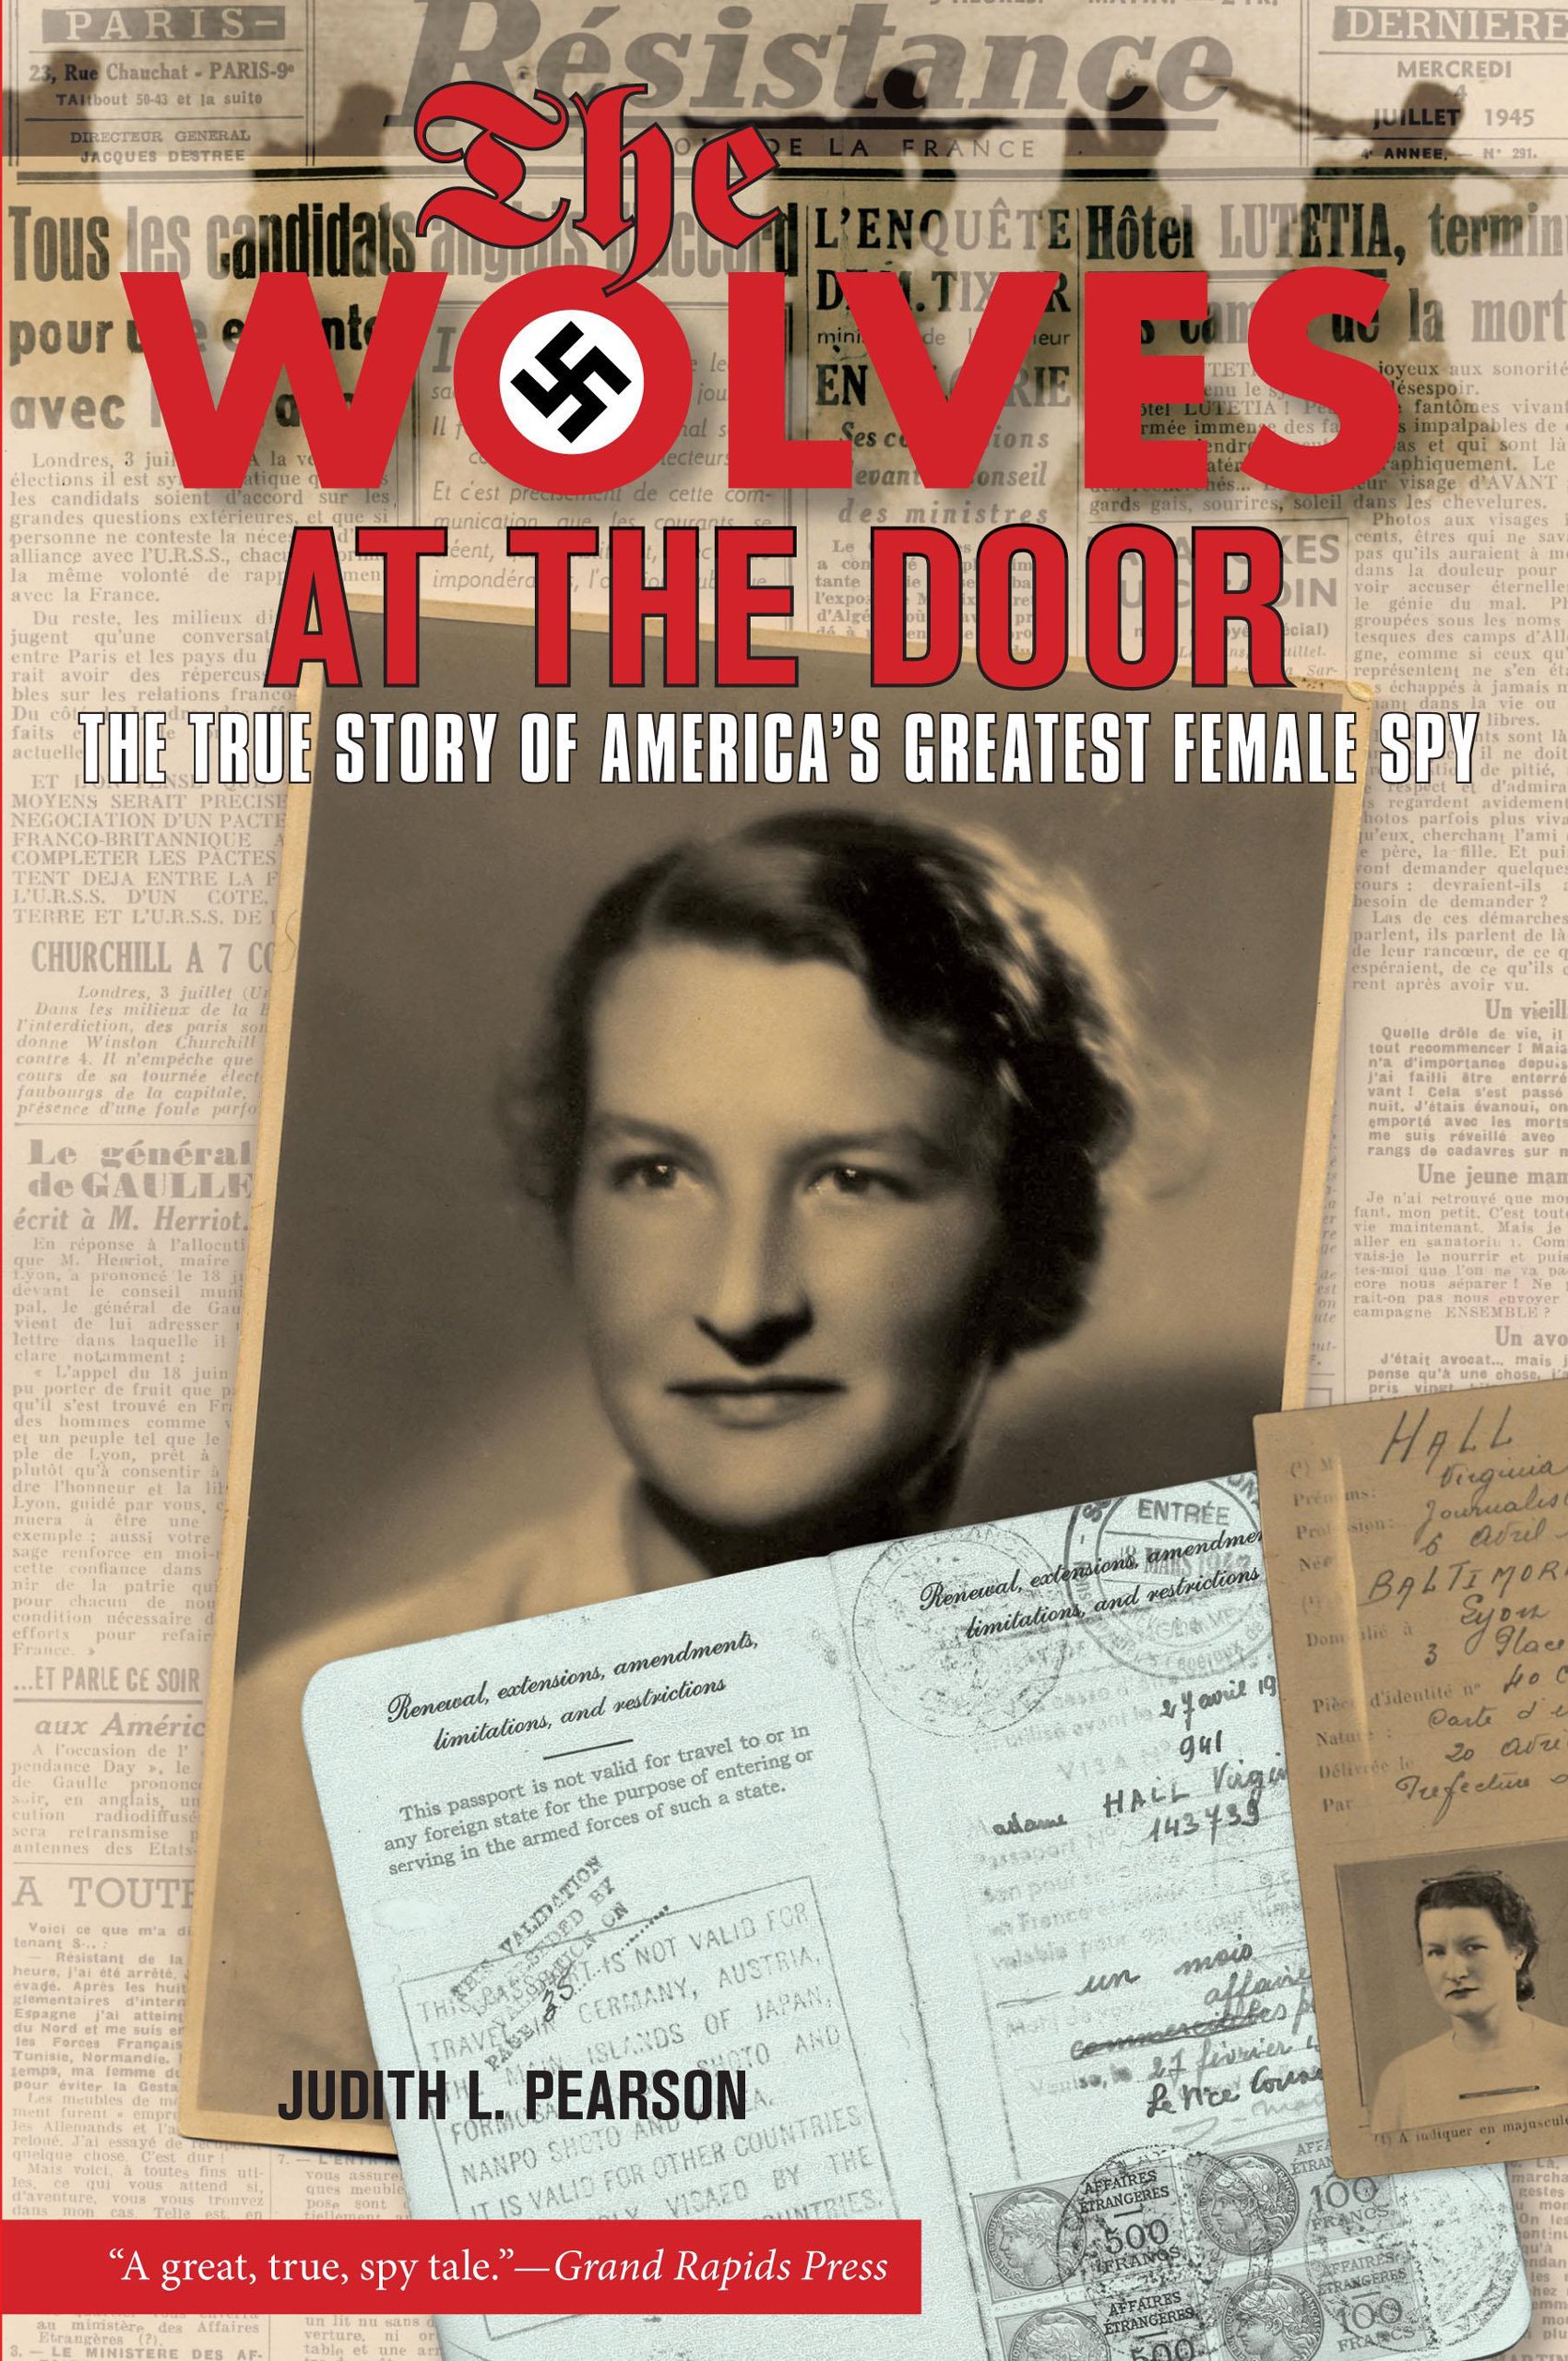 The Wolves at the Door: The True Story of America's Greatest Female Spy